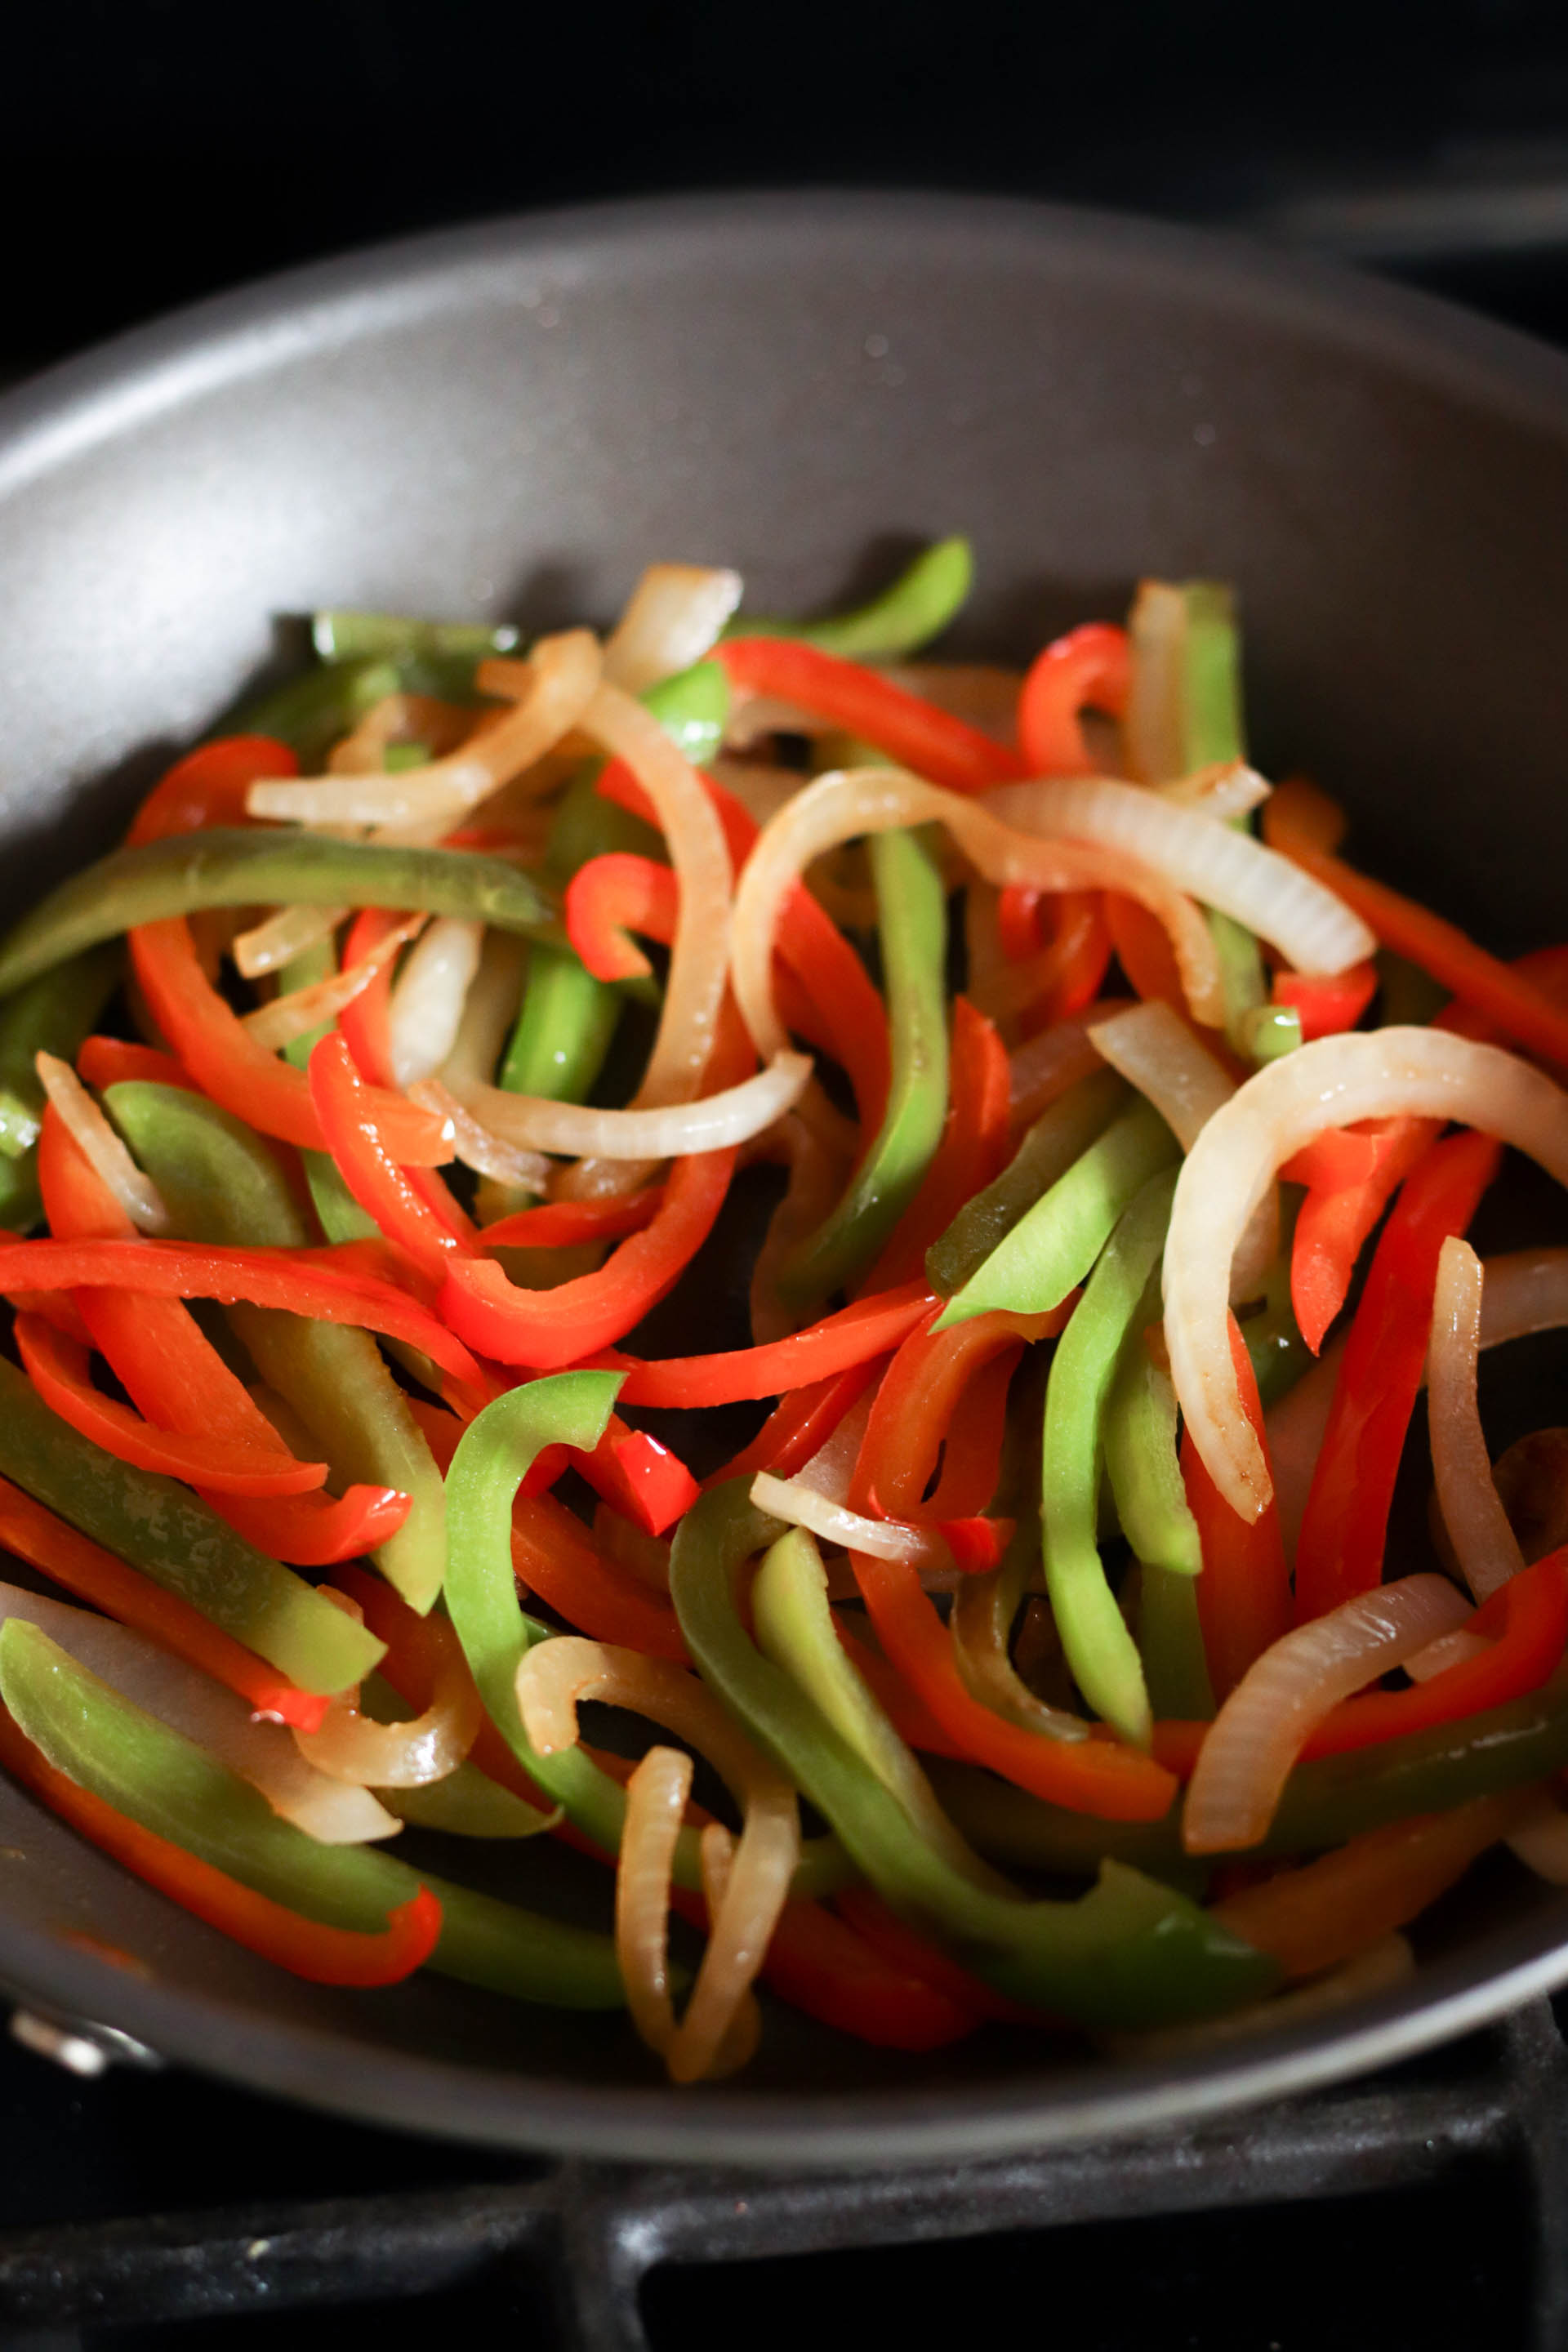 Onions and peppers in a skillet